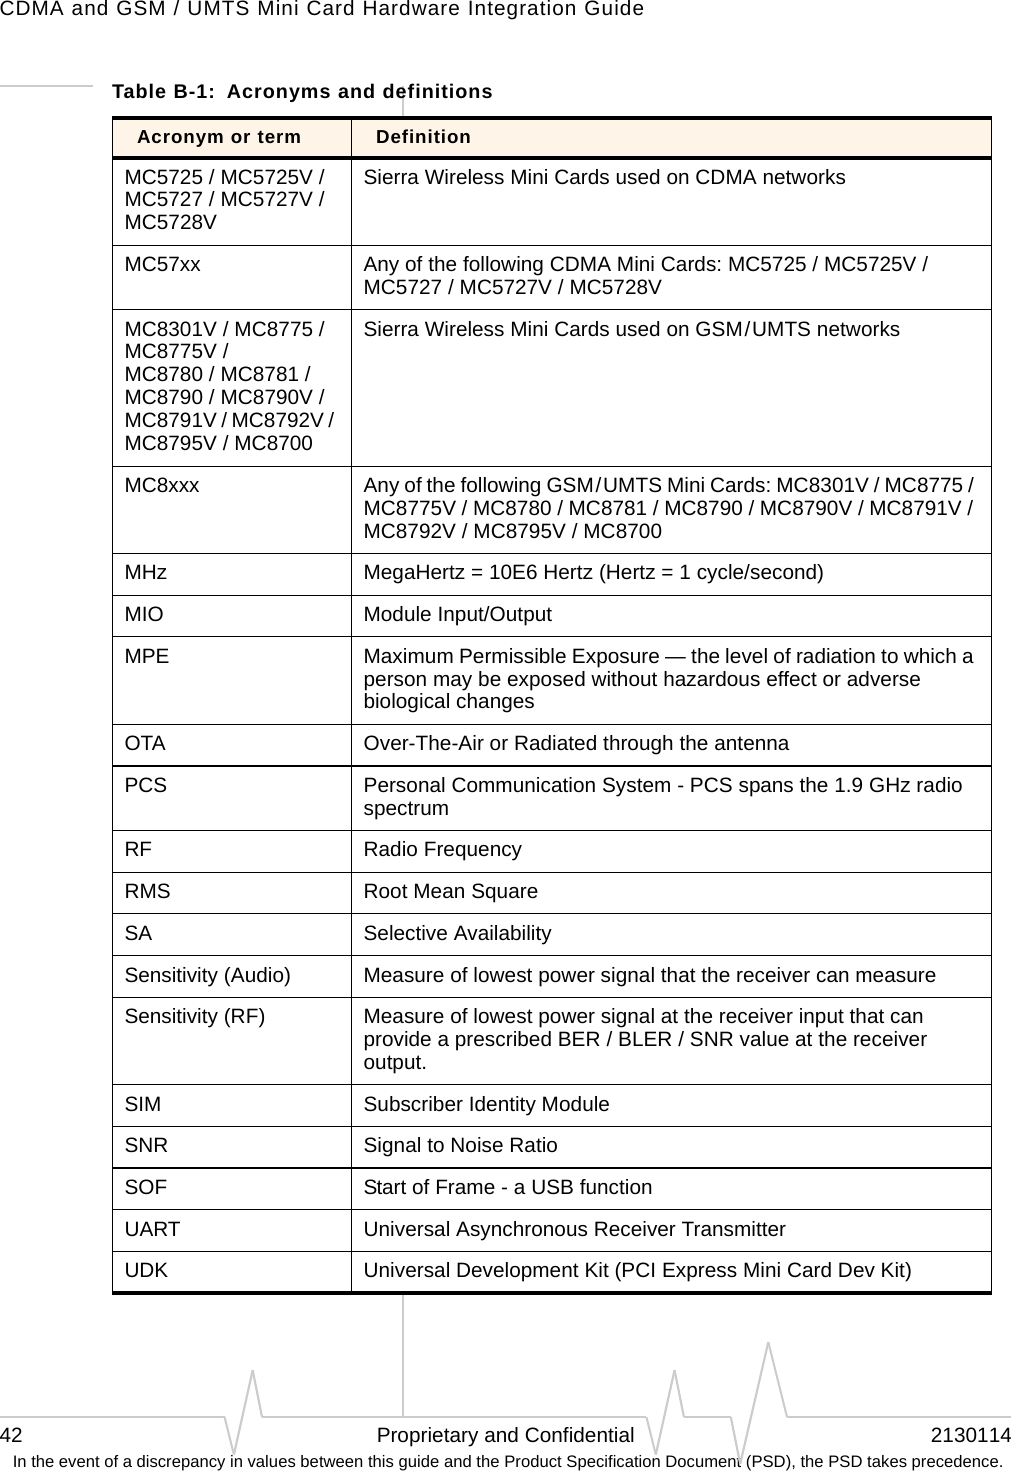 CDMA and GSM / UMTS Mini Card Hardware Integration Guide42 Proprietary and Confidential 2130114 In the event of a discrepancy in values between this guide and the Product Specification Document (PSD), the PSD takes precedence.MC5725 / MC5725V / MC5727 / MC5727V /  MC5728VSierra Wireless Mini Cards used on CDMA networksMC57xx Any of the following CDMA Mini Cards: MC5725 / MC5725V / MC5727 / MC5727V / MC5728VMC8301V / MC8775 / MC8775V / MC8780 / MC8781 / MC8790 / MC8790V / MC8791V / MC8792V / MC8795V / MC8700Sierra Wireless Mini Cards used on GSM / UMTS networksMC8xxx Any of the following GSM / UMTS Mini Cards: MC8301V / MC8775 / MC8775V / MC8780 / MC8781 / MC8790 / MC8790V / MC8791V / MC8792V / MC8795V / MC8700MHz MegaHertz = 10E6 Hertz (Hertz = 1 cycle/second)MIO Module Input/OutputMPE Maximum Permissible Exposure — the level of radiation to which a person may be exposed without hazardous effect or adverse biological changesOTA Over-The-Air or Radiated through the antennaPCS Personal Communication System - PCS spans the 1.9 GHz radio spectrumRF Radio FrequencyRMS Root Mean SquareSA Selective AvailabilitySensitivity (Audio) Measure of lowest power signal that the receiver can measureSensitivity (RF) Measure of lowest power signal at the receiver input that can provide a prescribed BER / BLER / SNR value at the receiver output.SIM Subscriber Identity ModuleSNR Signal to Noise RatioSOF Start of Frame - a USB functionUART Universal Asynchronous Receiver TransmitterUDK Universal Development Kit (PCI Express Mini Card Dev Kit)Table B-1:  Acronyms and definitionsAcronym or term Definition